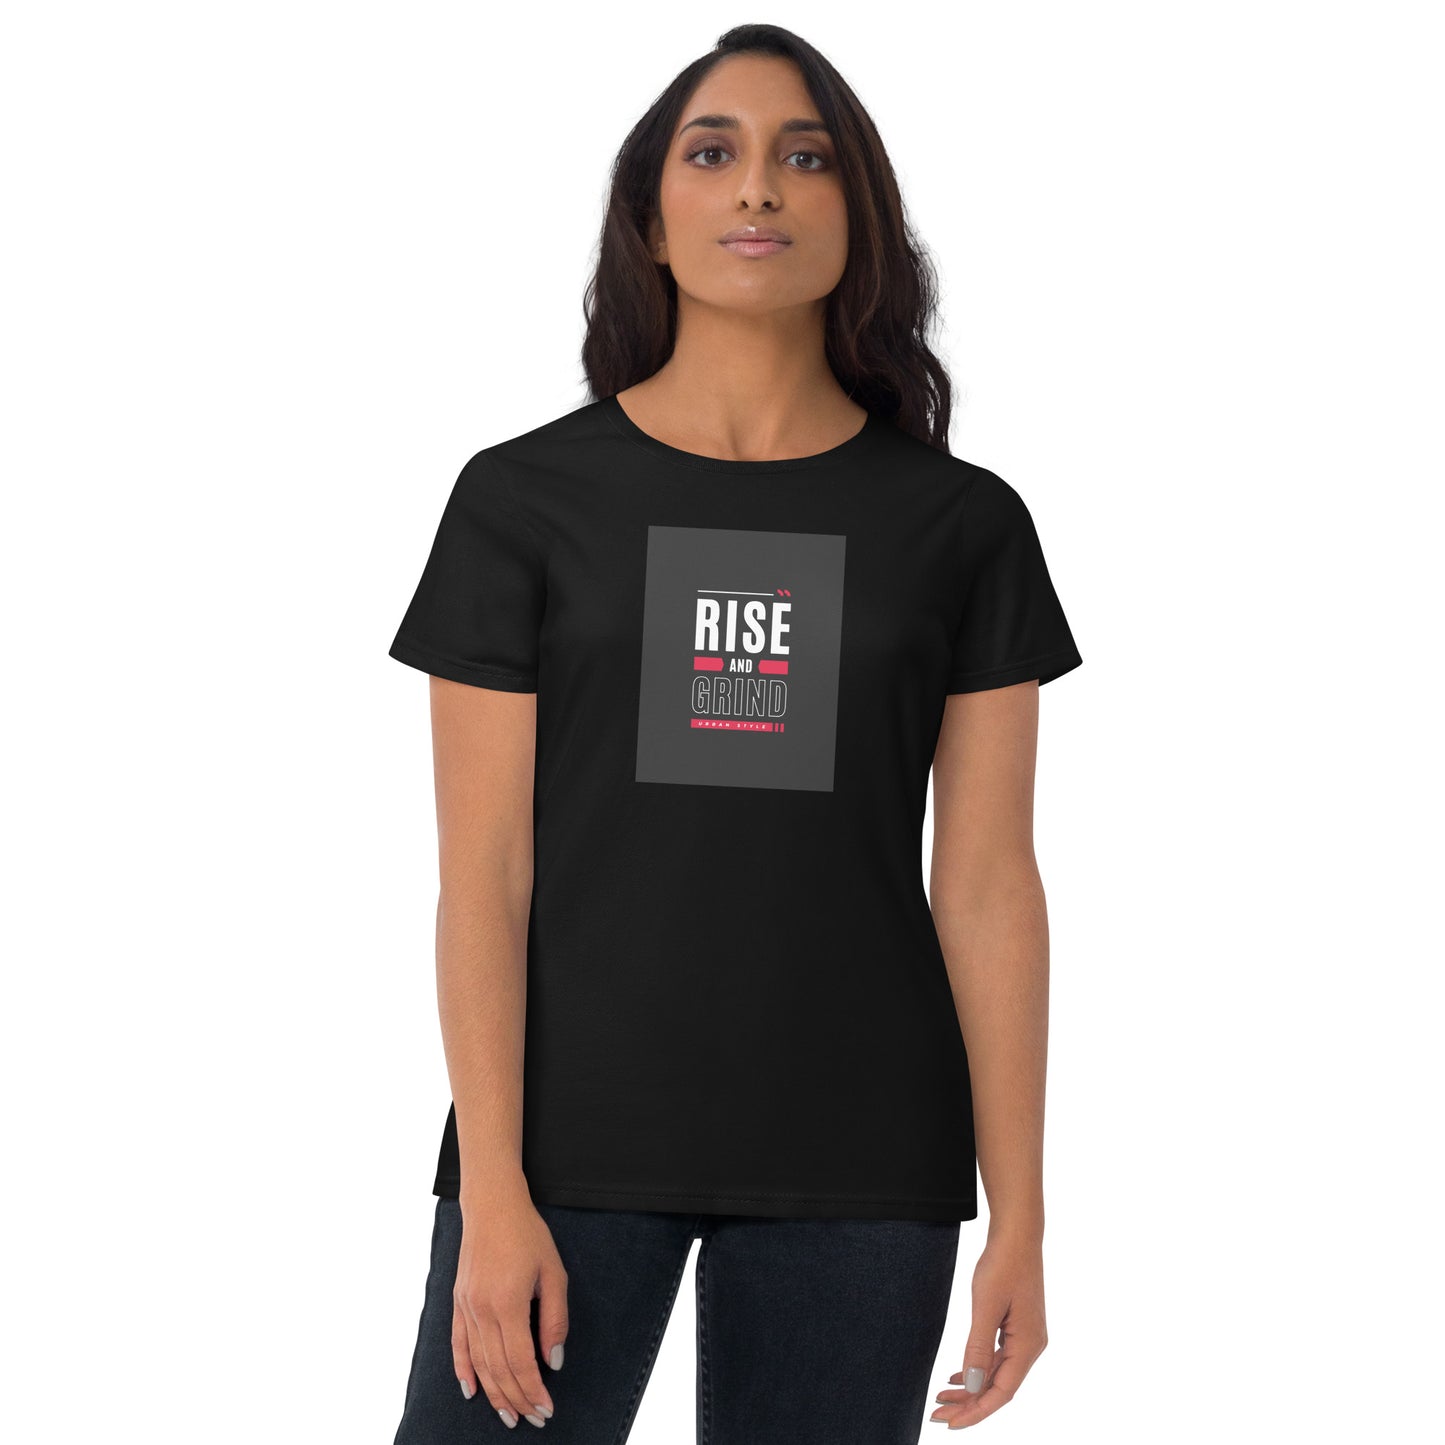 RISE AND GRIND Women's short sleeve t-shirt